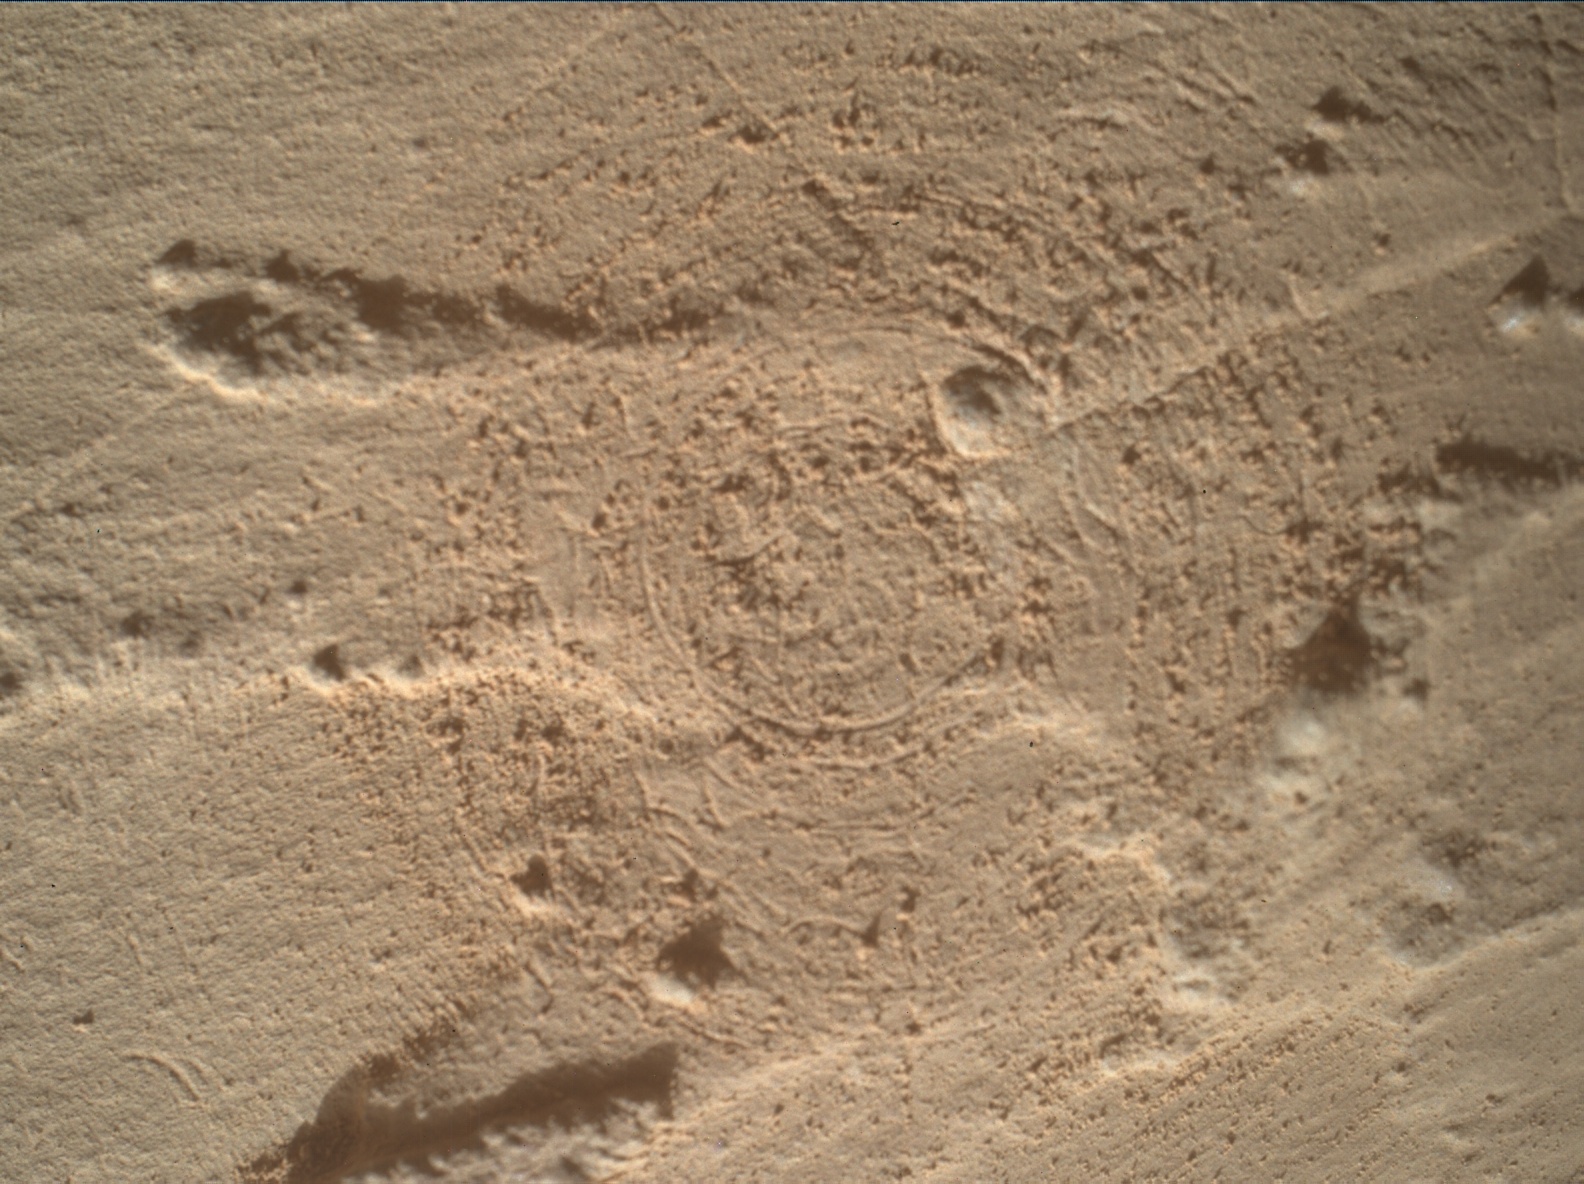 Nasa's Mars rover Curiosity acquired this image using its Mars Hand Lens Imager (MAHLI) on Sol 3964